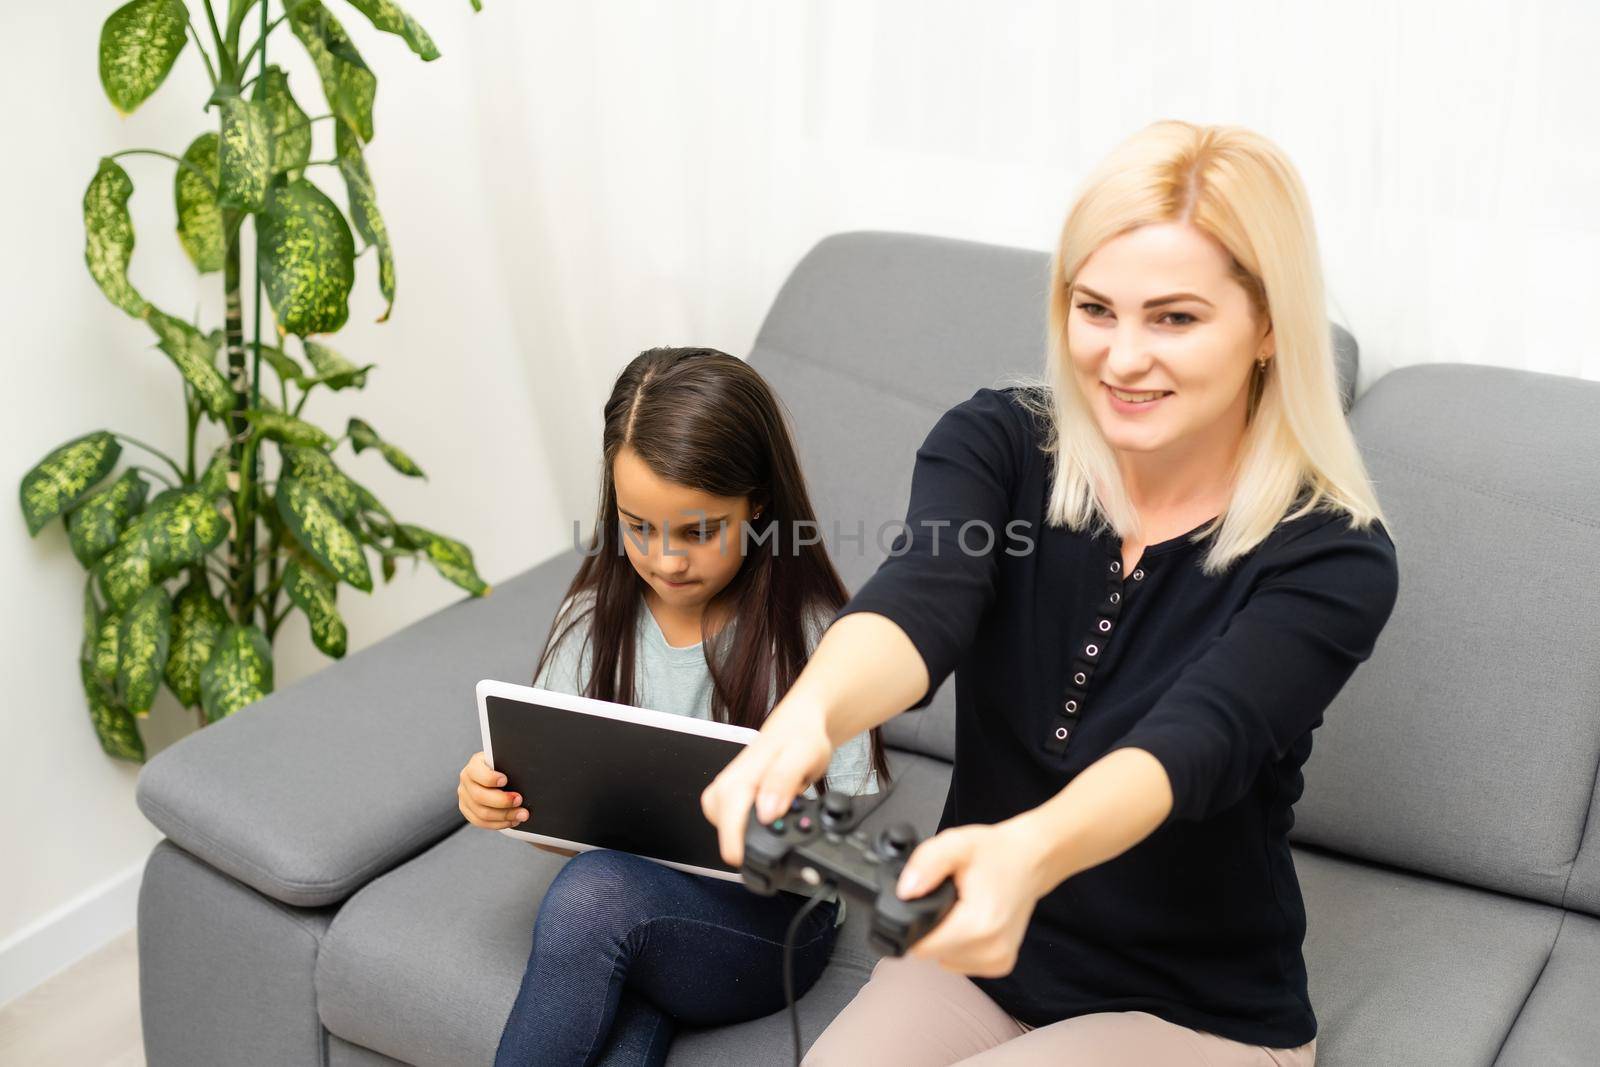 Mother and daughter sittingr in a playroom, playing video games and having fun.